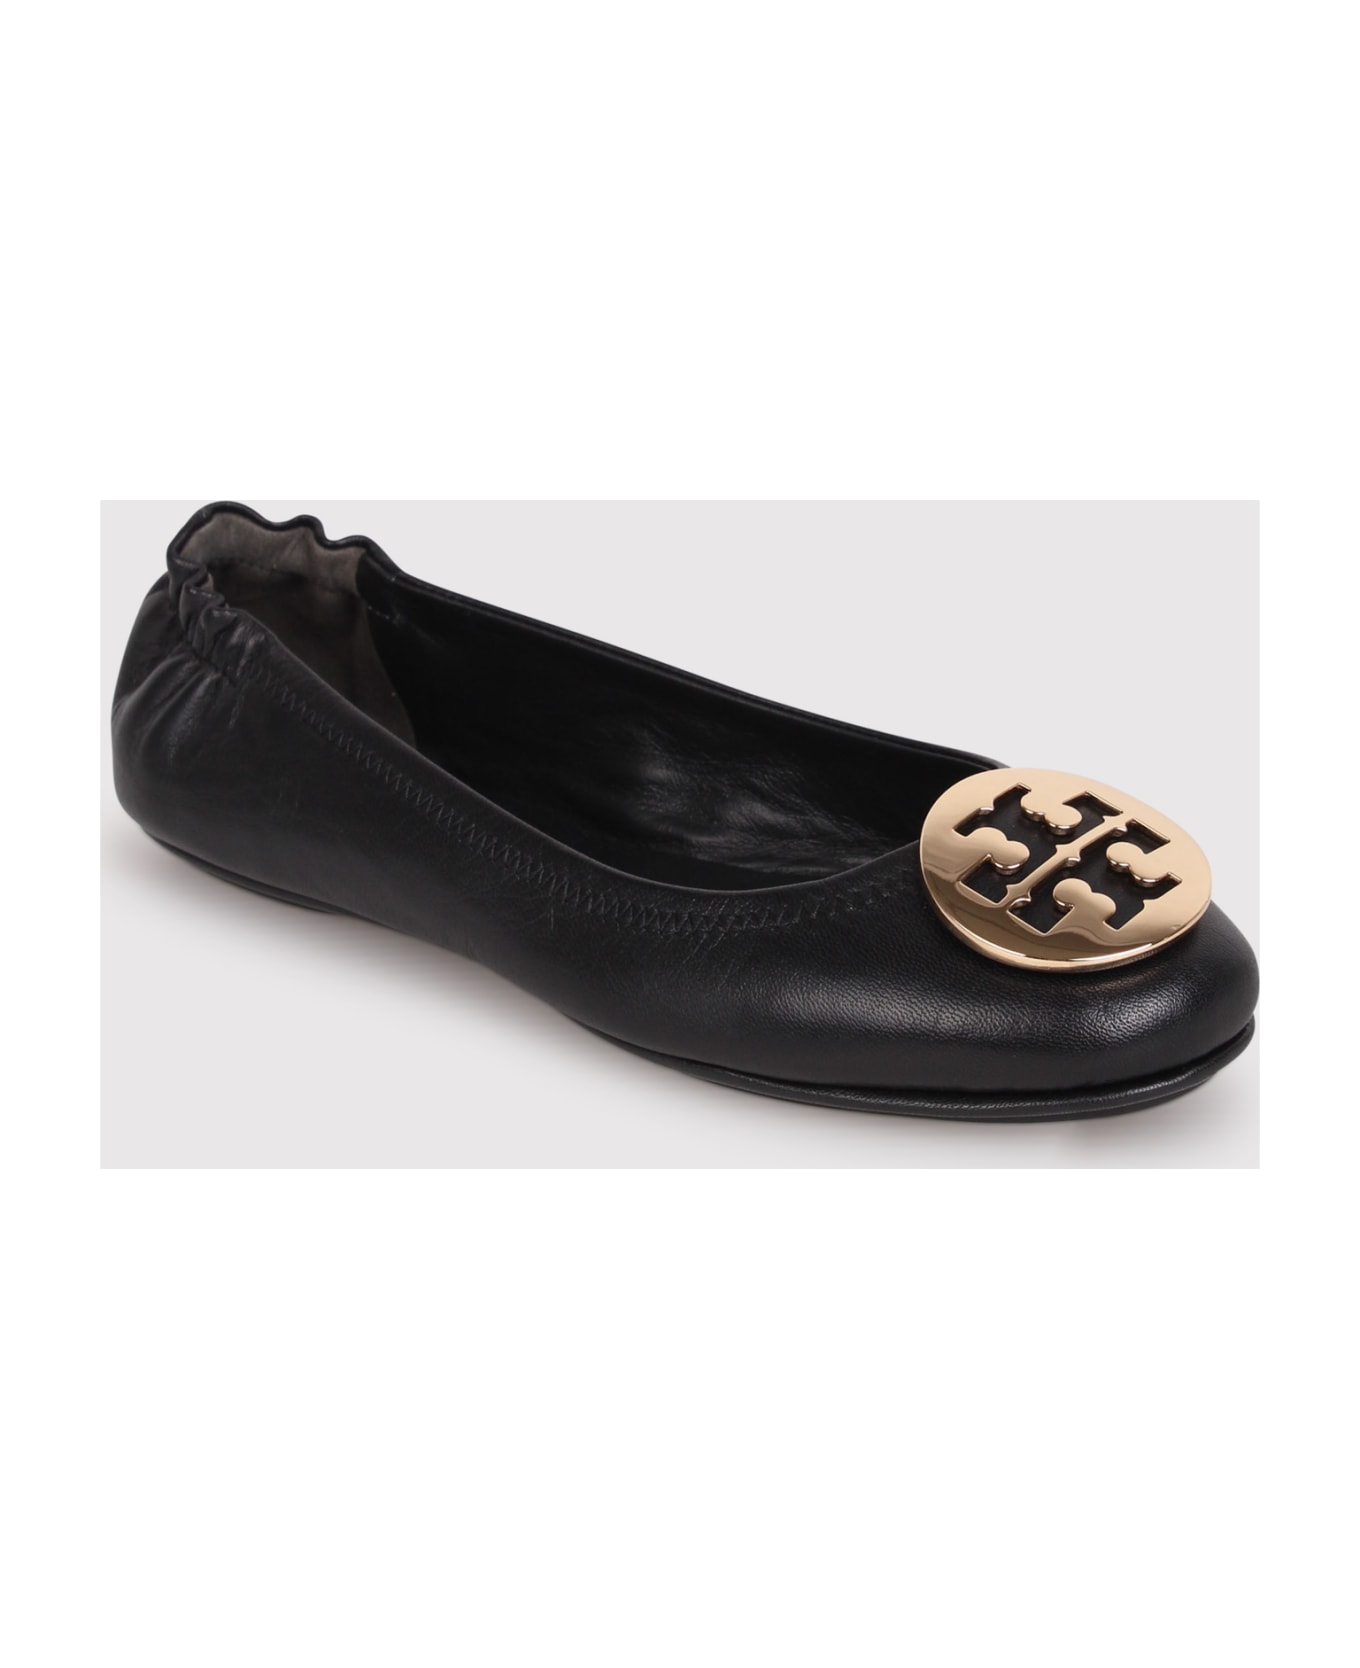 Tory Burch Minnie Ballerinas With Application